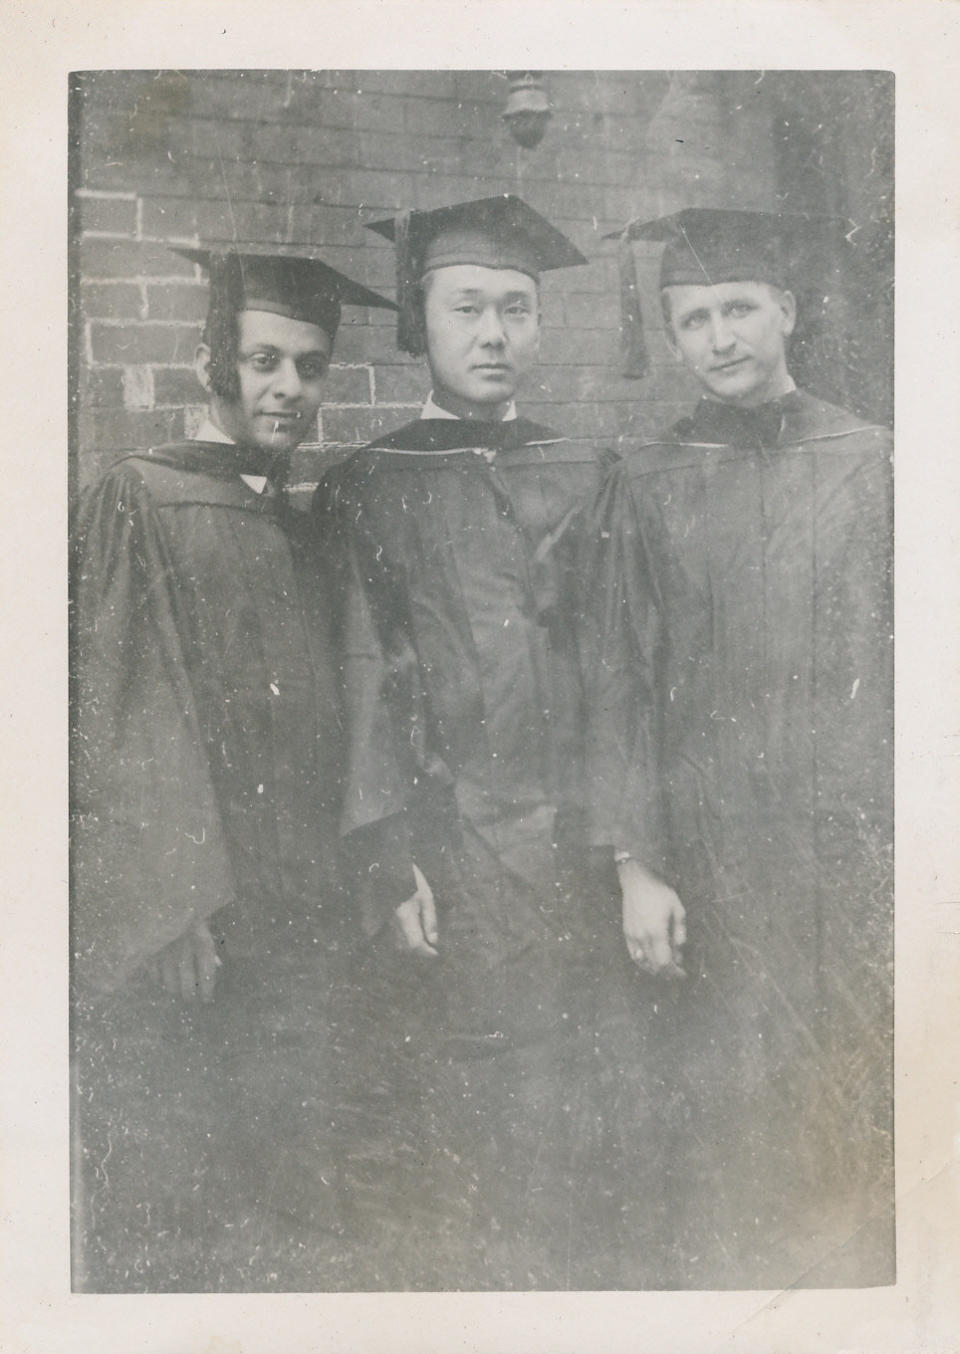 Homer Yasui poses with two medical school classmates upon his graduation in 1949. "The guy on my right is Dominic Stuccio, and the guy on my left is Arthur Zeglen," he says. (Photo: Homer Yasui)